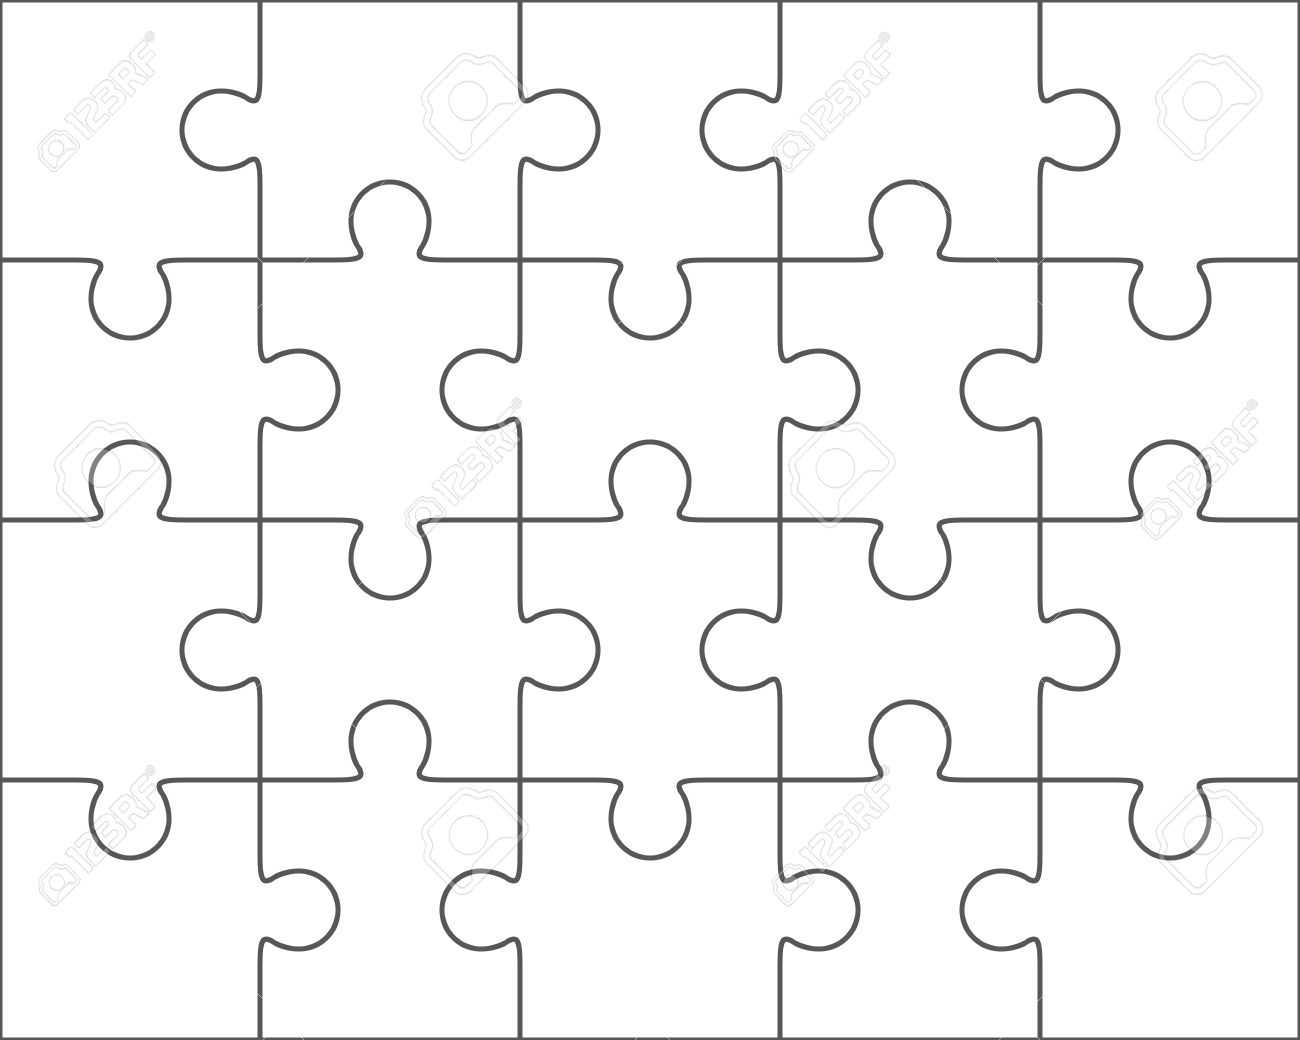 Jigsaw Puzzle Vector, Blank Simple Template 4X5, Twenty Pieces With Blank Jigsaw Piece Template